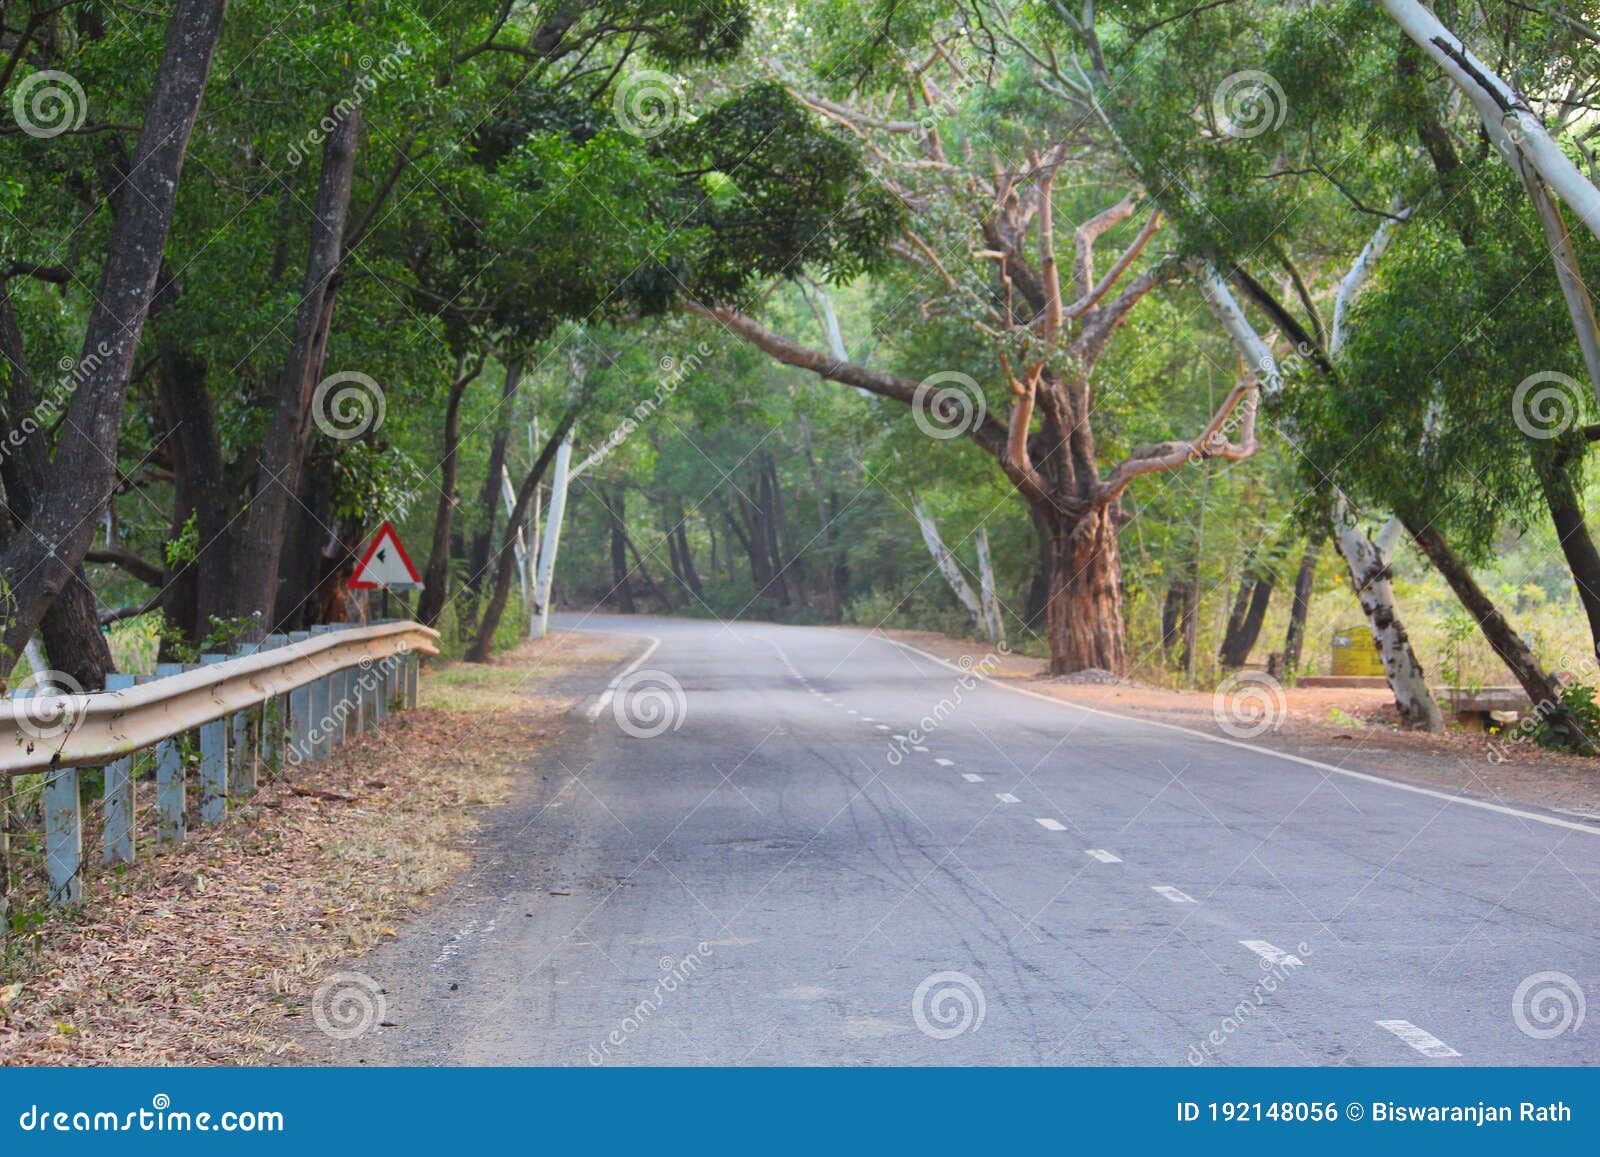 Road Going through Jungle Beautiful Road Background Wallpaper Hd Stock  Photo - Image of beautiful, background: 192148056